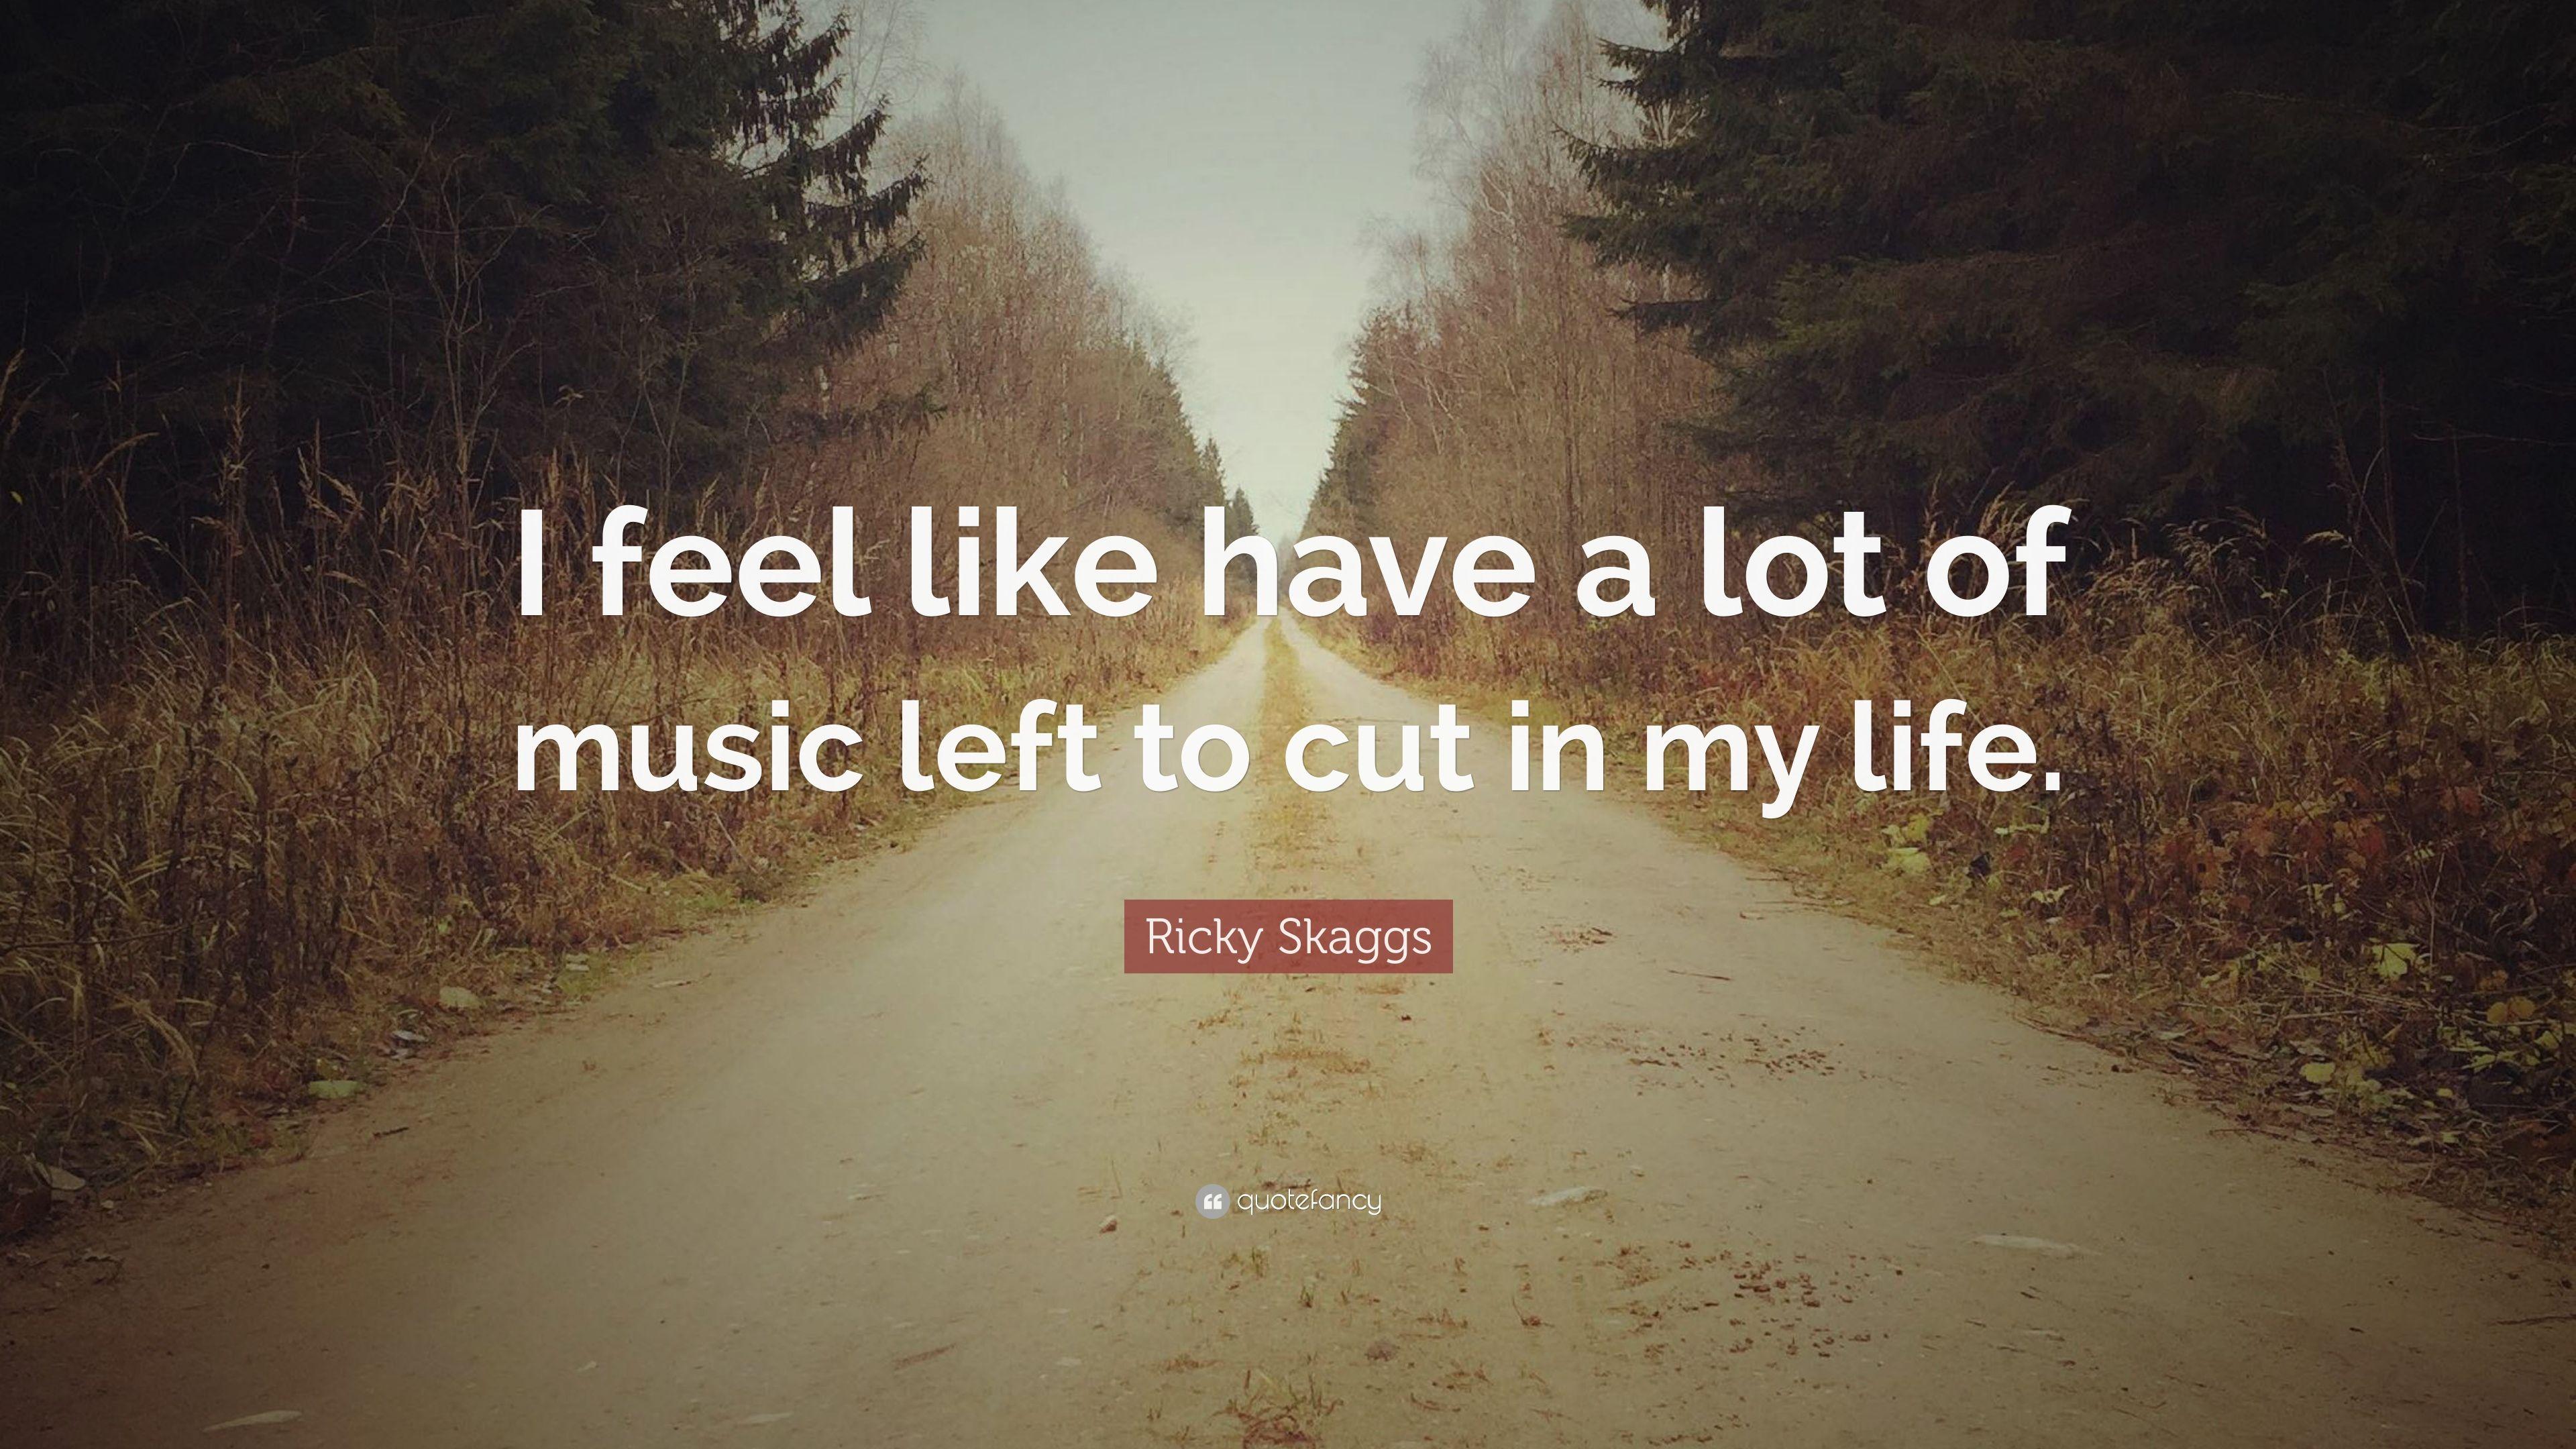 Ricky Skaggs Quote: “I feel like have a lot of music left to cut